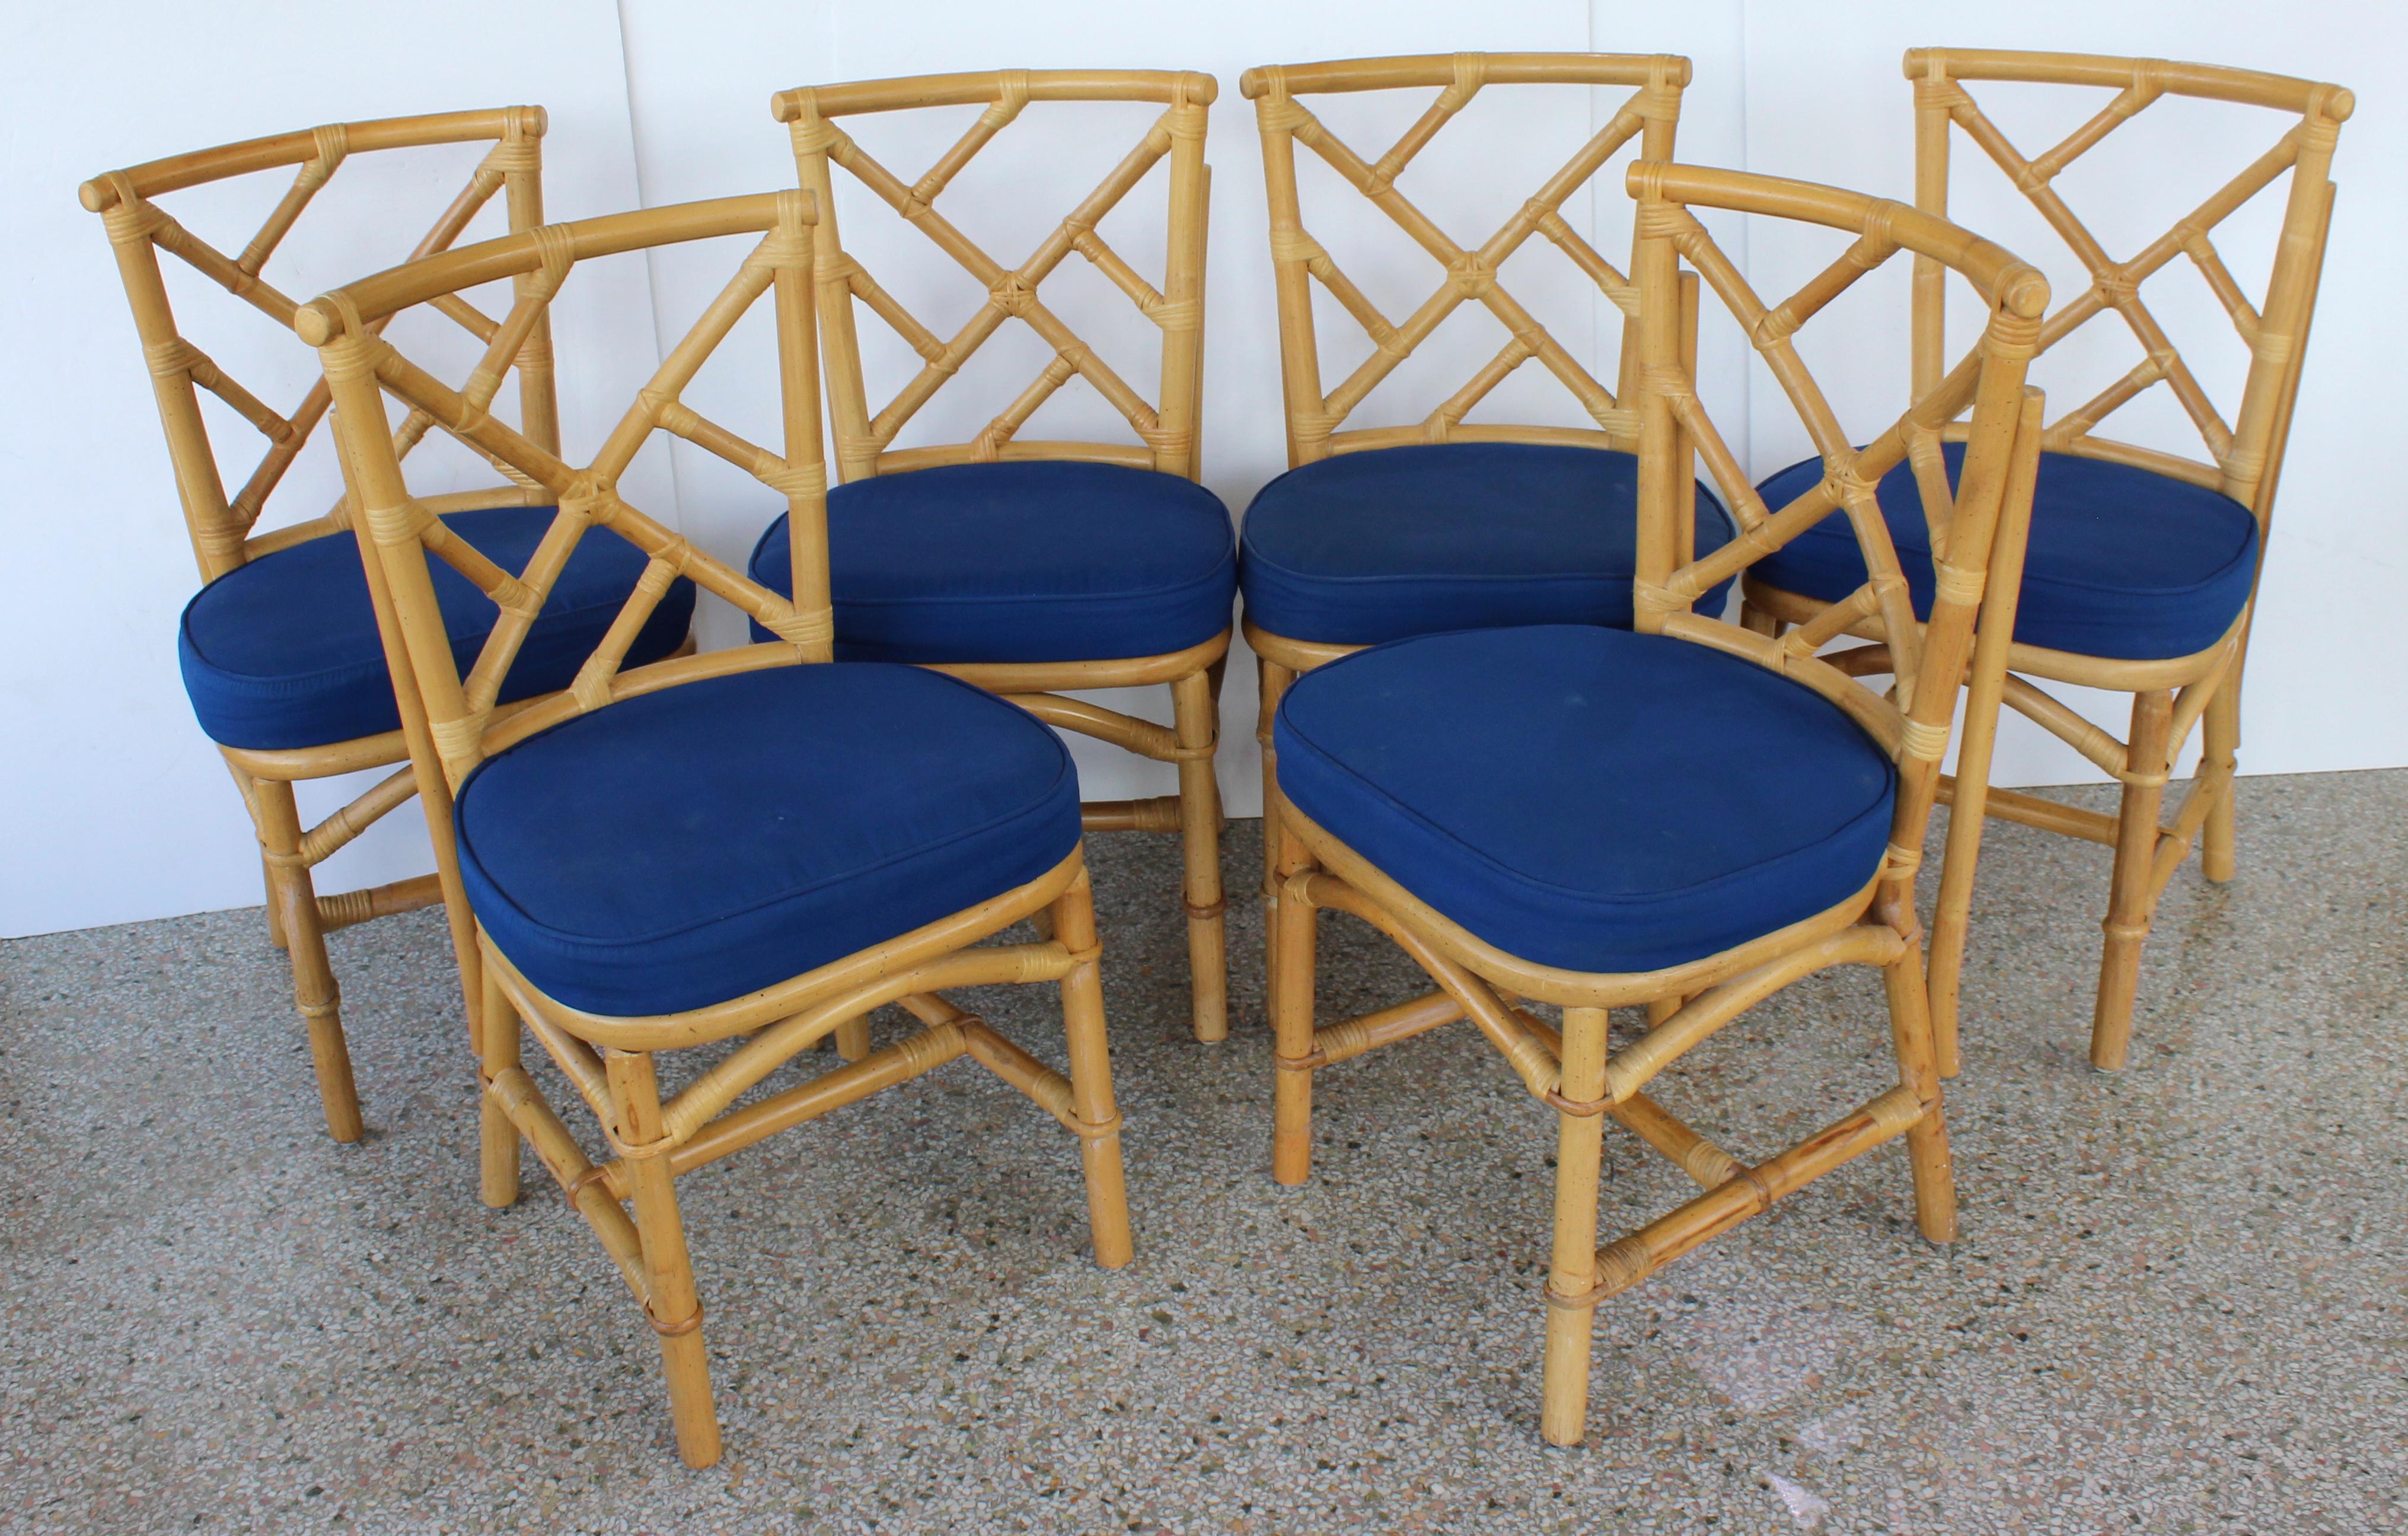 This set of four bamboo side chairs were acquired from a local Palm Beach club, and are of commercial quality, with sturdy frames. 

Note: All of the four Sunbrella upholstered seat cushions show signs of wear and soiling, and were recently